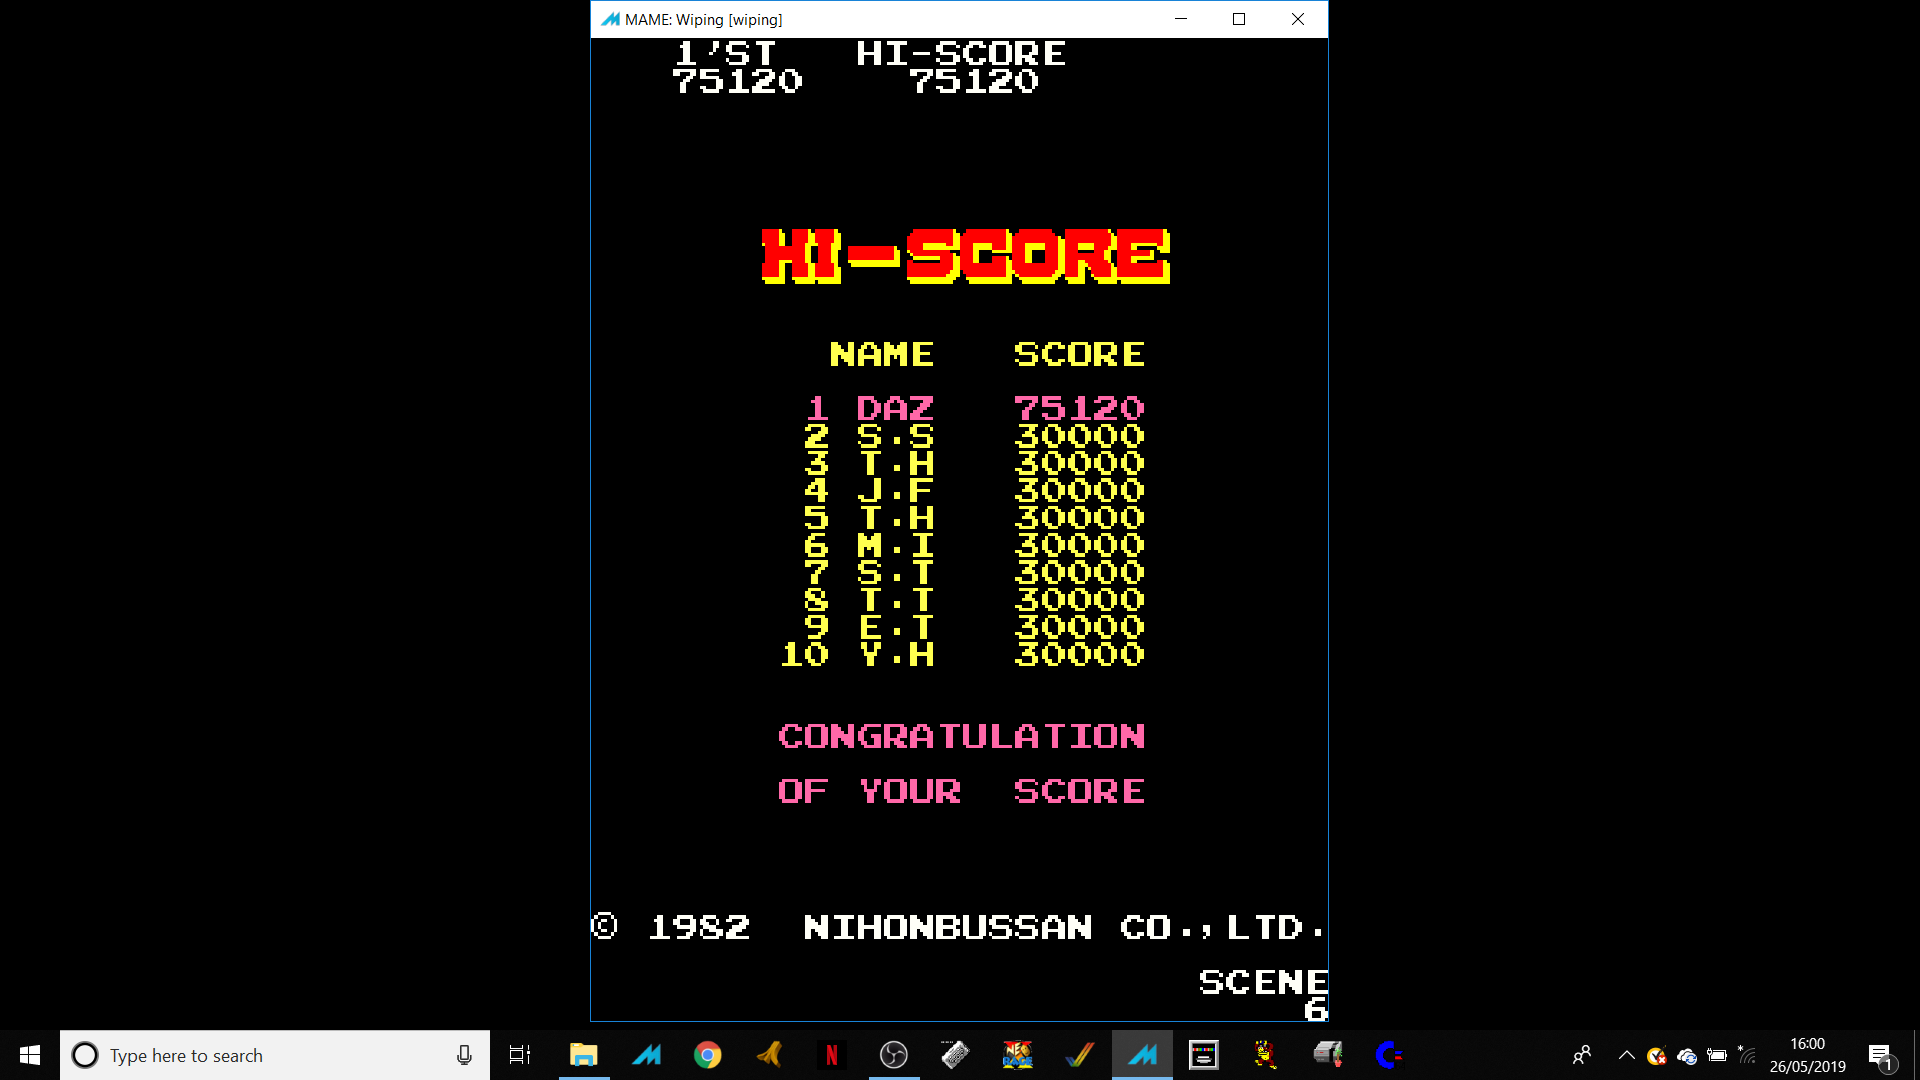 Ivanstorm1973: Wiping [wiping] (Arcade Emulated / M.A.M.E.) 75,120 points on 2019-05-27 14:45:43